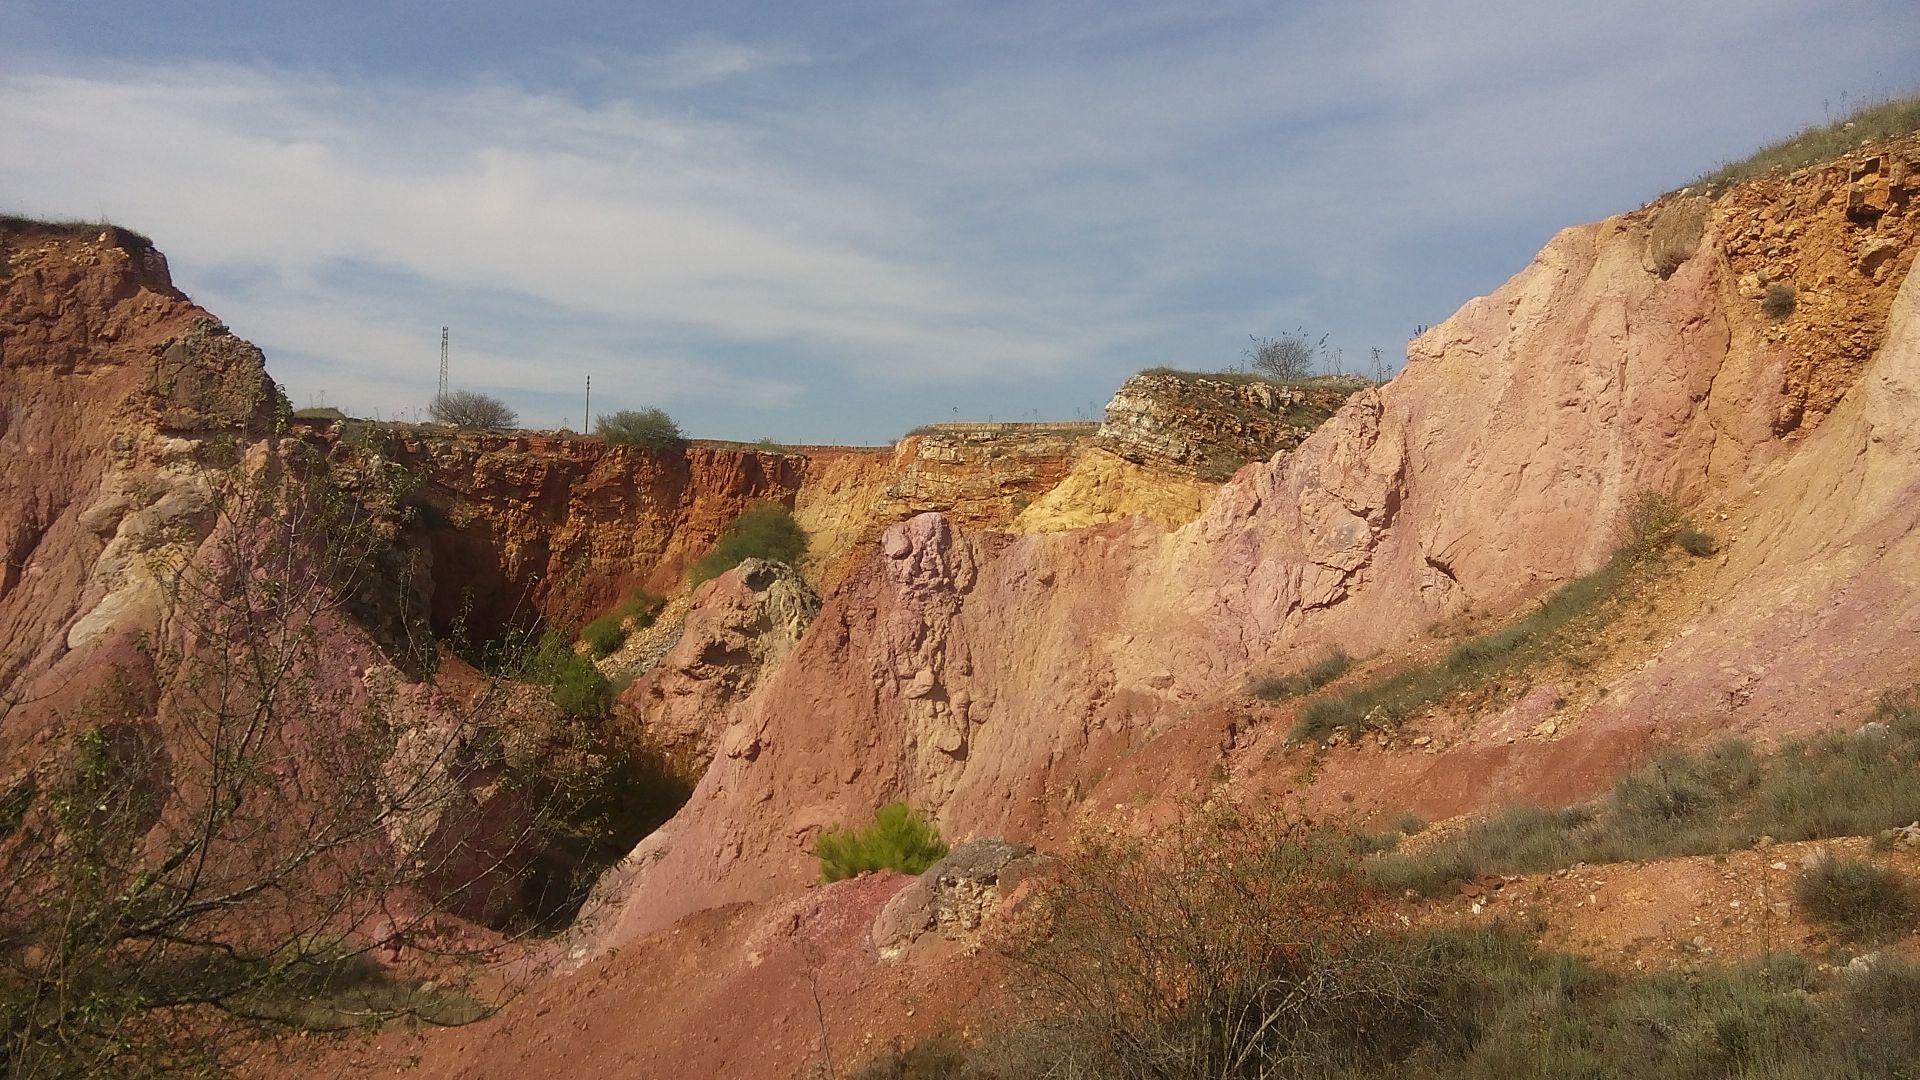 FT5. Late Cretaceous tectonic control on bauxite formation, Murge Plateau, southern Italy